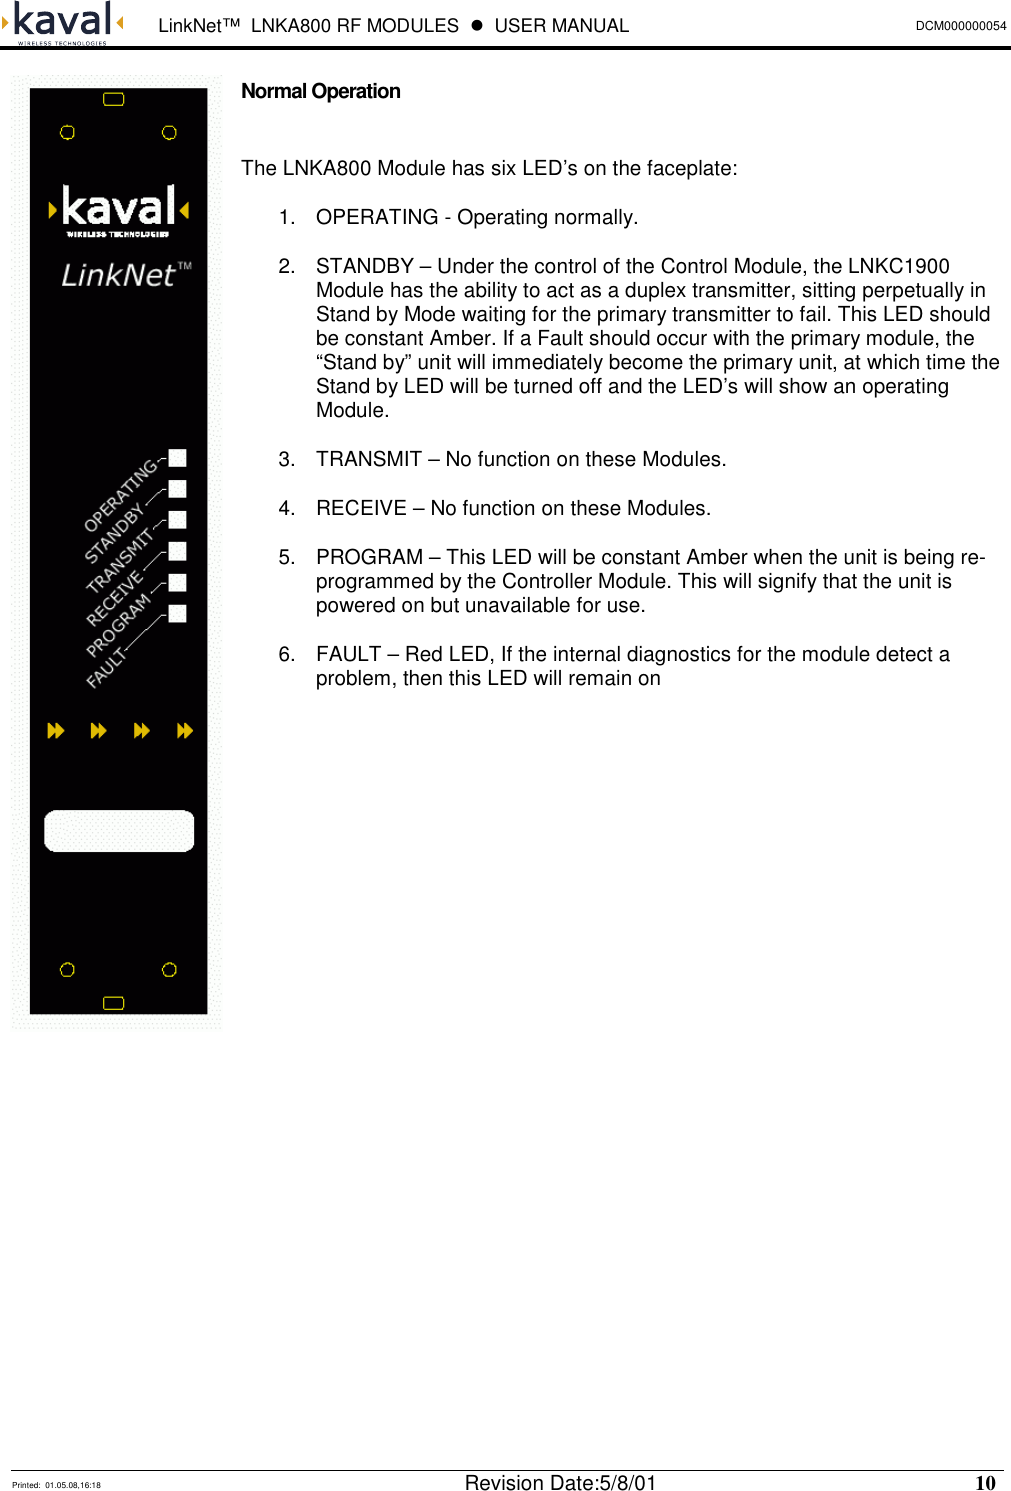  LinkNet™  LNKA800 RF MODULES  !  USER MANUAL DCM000000054   Printed:  01.05.08,16:18  Revision Date:5/8/01   10   Normal Operation  The LNKA800 Module has six LED’s on the faceplate: 1.  OPERATING - Operating normally. 2.  STANDBY – Under the control of the Control Module, the LNKC1900 Module has the ability to act as a duplex transmitter, sitting perpetually in Stand by Mode waiting for the primary transmitter to fail. This LED should be constant Amber. If a Fault should occur with the primary module, the “Stand by” unit will immediately become the primary unit, at which time the Stand by LED will be turned off and the LED’s will show an operating Module. 3.  TRANSMIT – No function on these Modules. 4.  RECEIVE – No function on these Modules. 5.  PROGRAM – This LED will be constant Amber when the unit is being re-programmed by the Controller Module. This will signify that the unit is powered on but unavailable for use. 6.  FAULT – Red LED, If the internal diagnostics for the module detect a problem, then this LED will remain on               